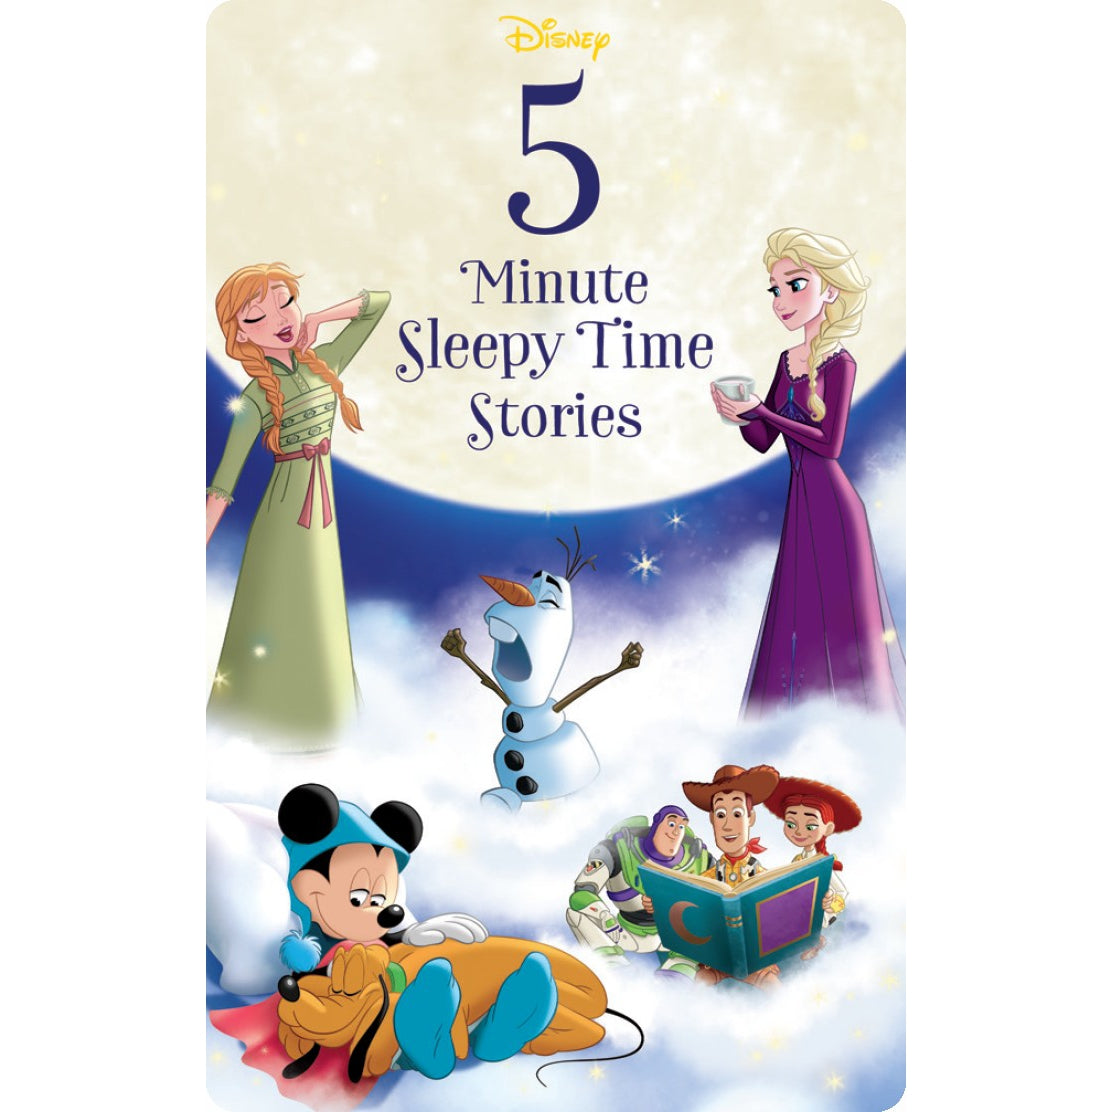 Yoto Card - Disney's 5 Minute Sleepy Time Stories - Child Friendly Audio Story Card for the Yoto Player